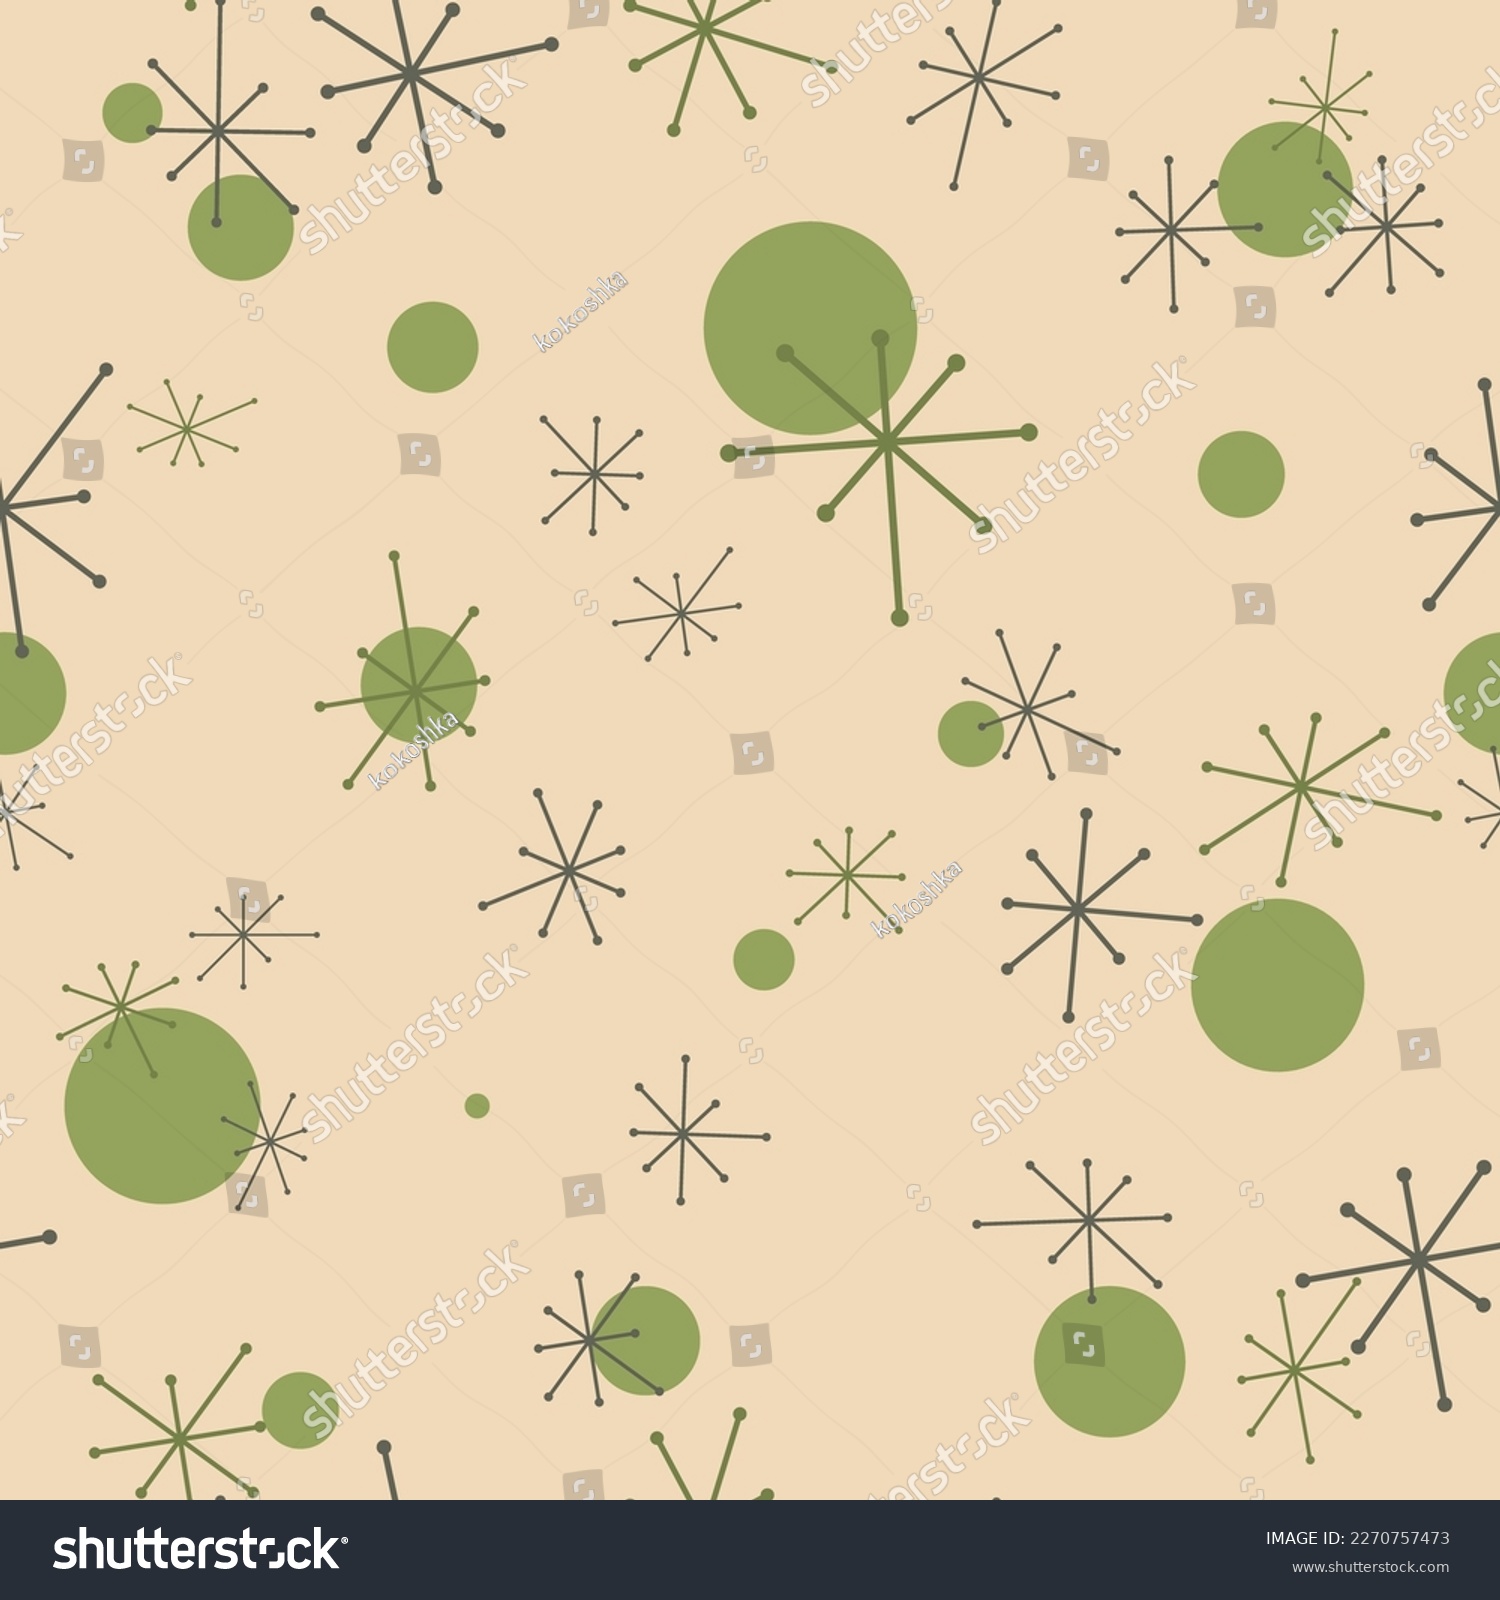 SVG of Seamless 50s Retro Pattern. Atomic Starbust Wallpaper. Mid Century Modern Repeating Background. 1950s Space Age Design svg